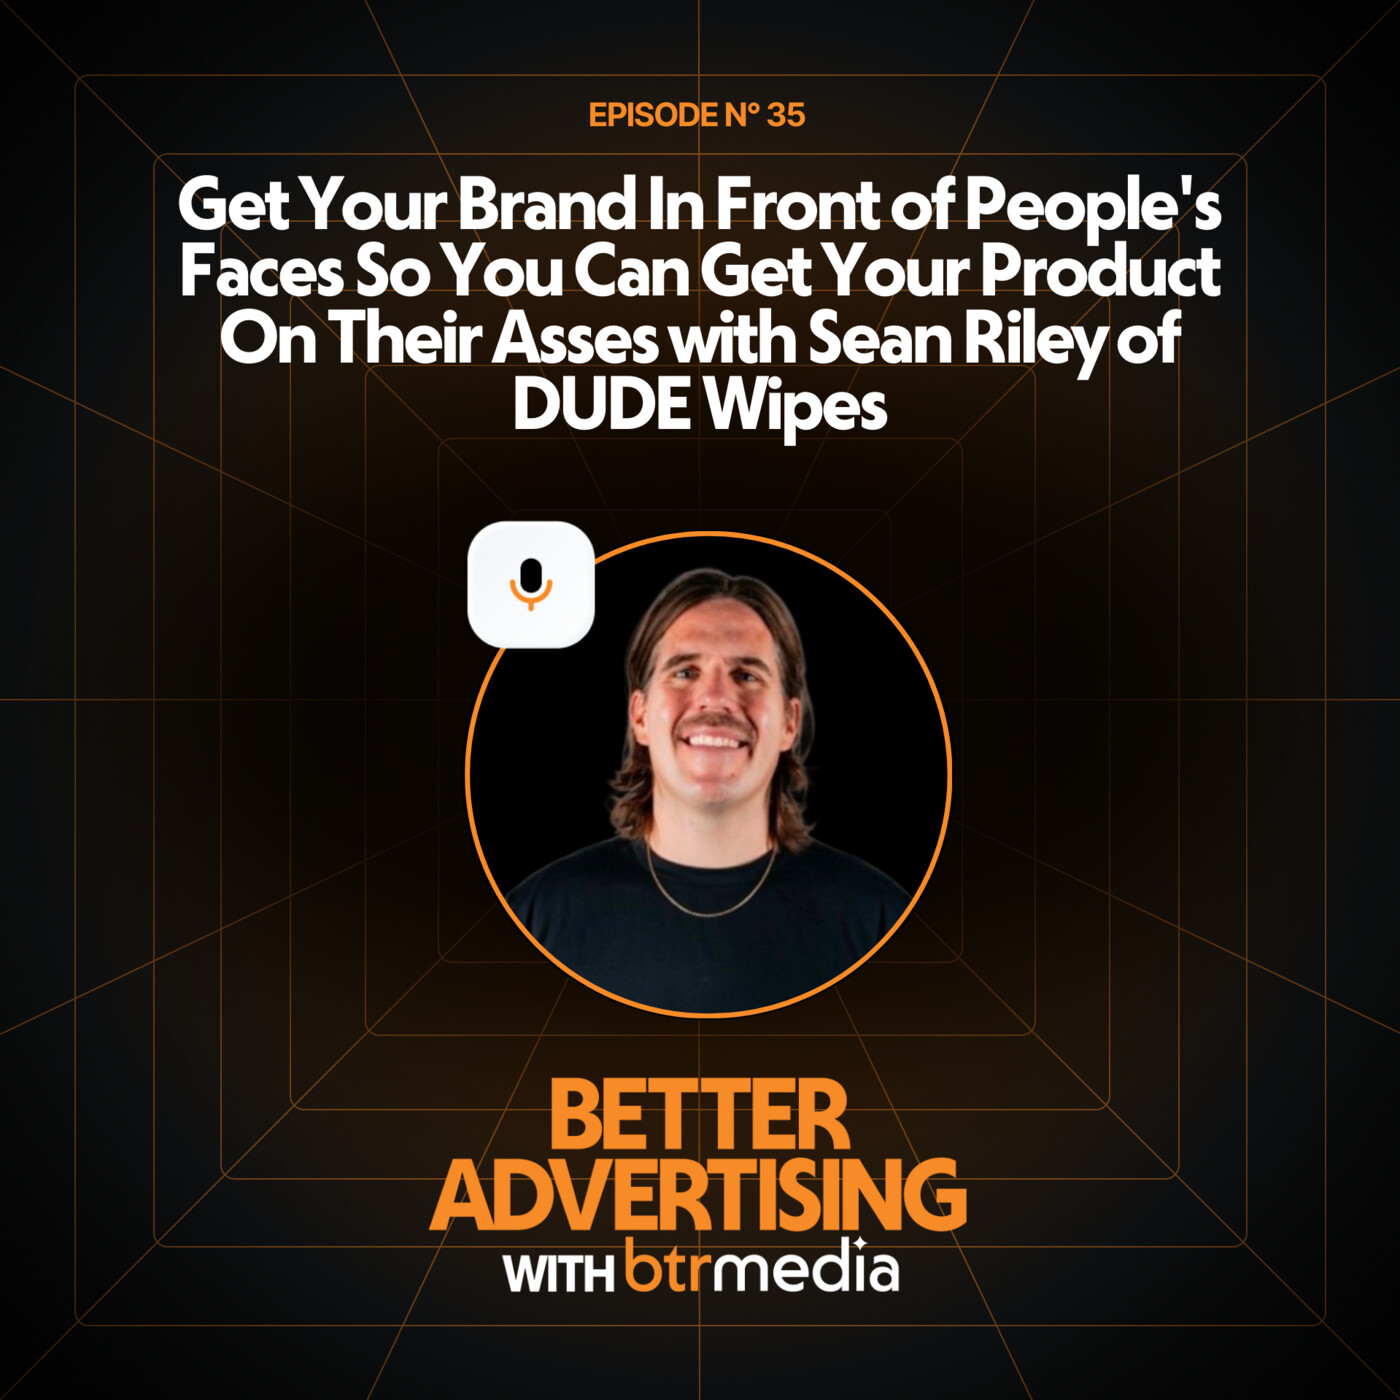 DUDE Wipes: Show Your Brand, Get On Their Butts with Sean Riley